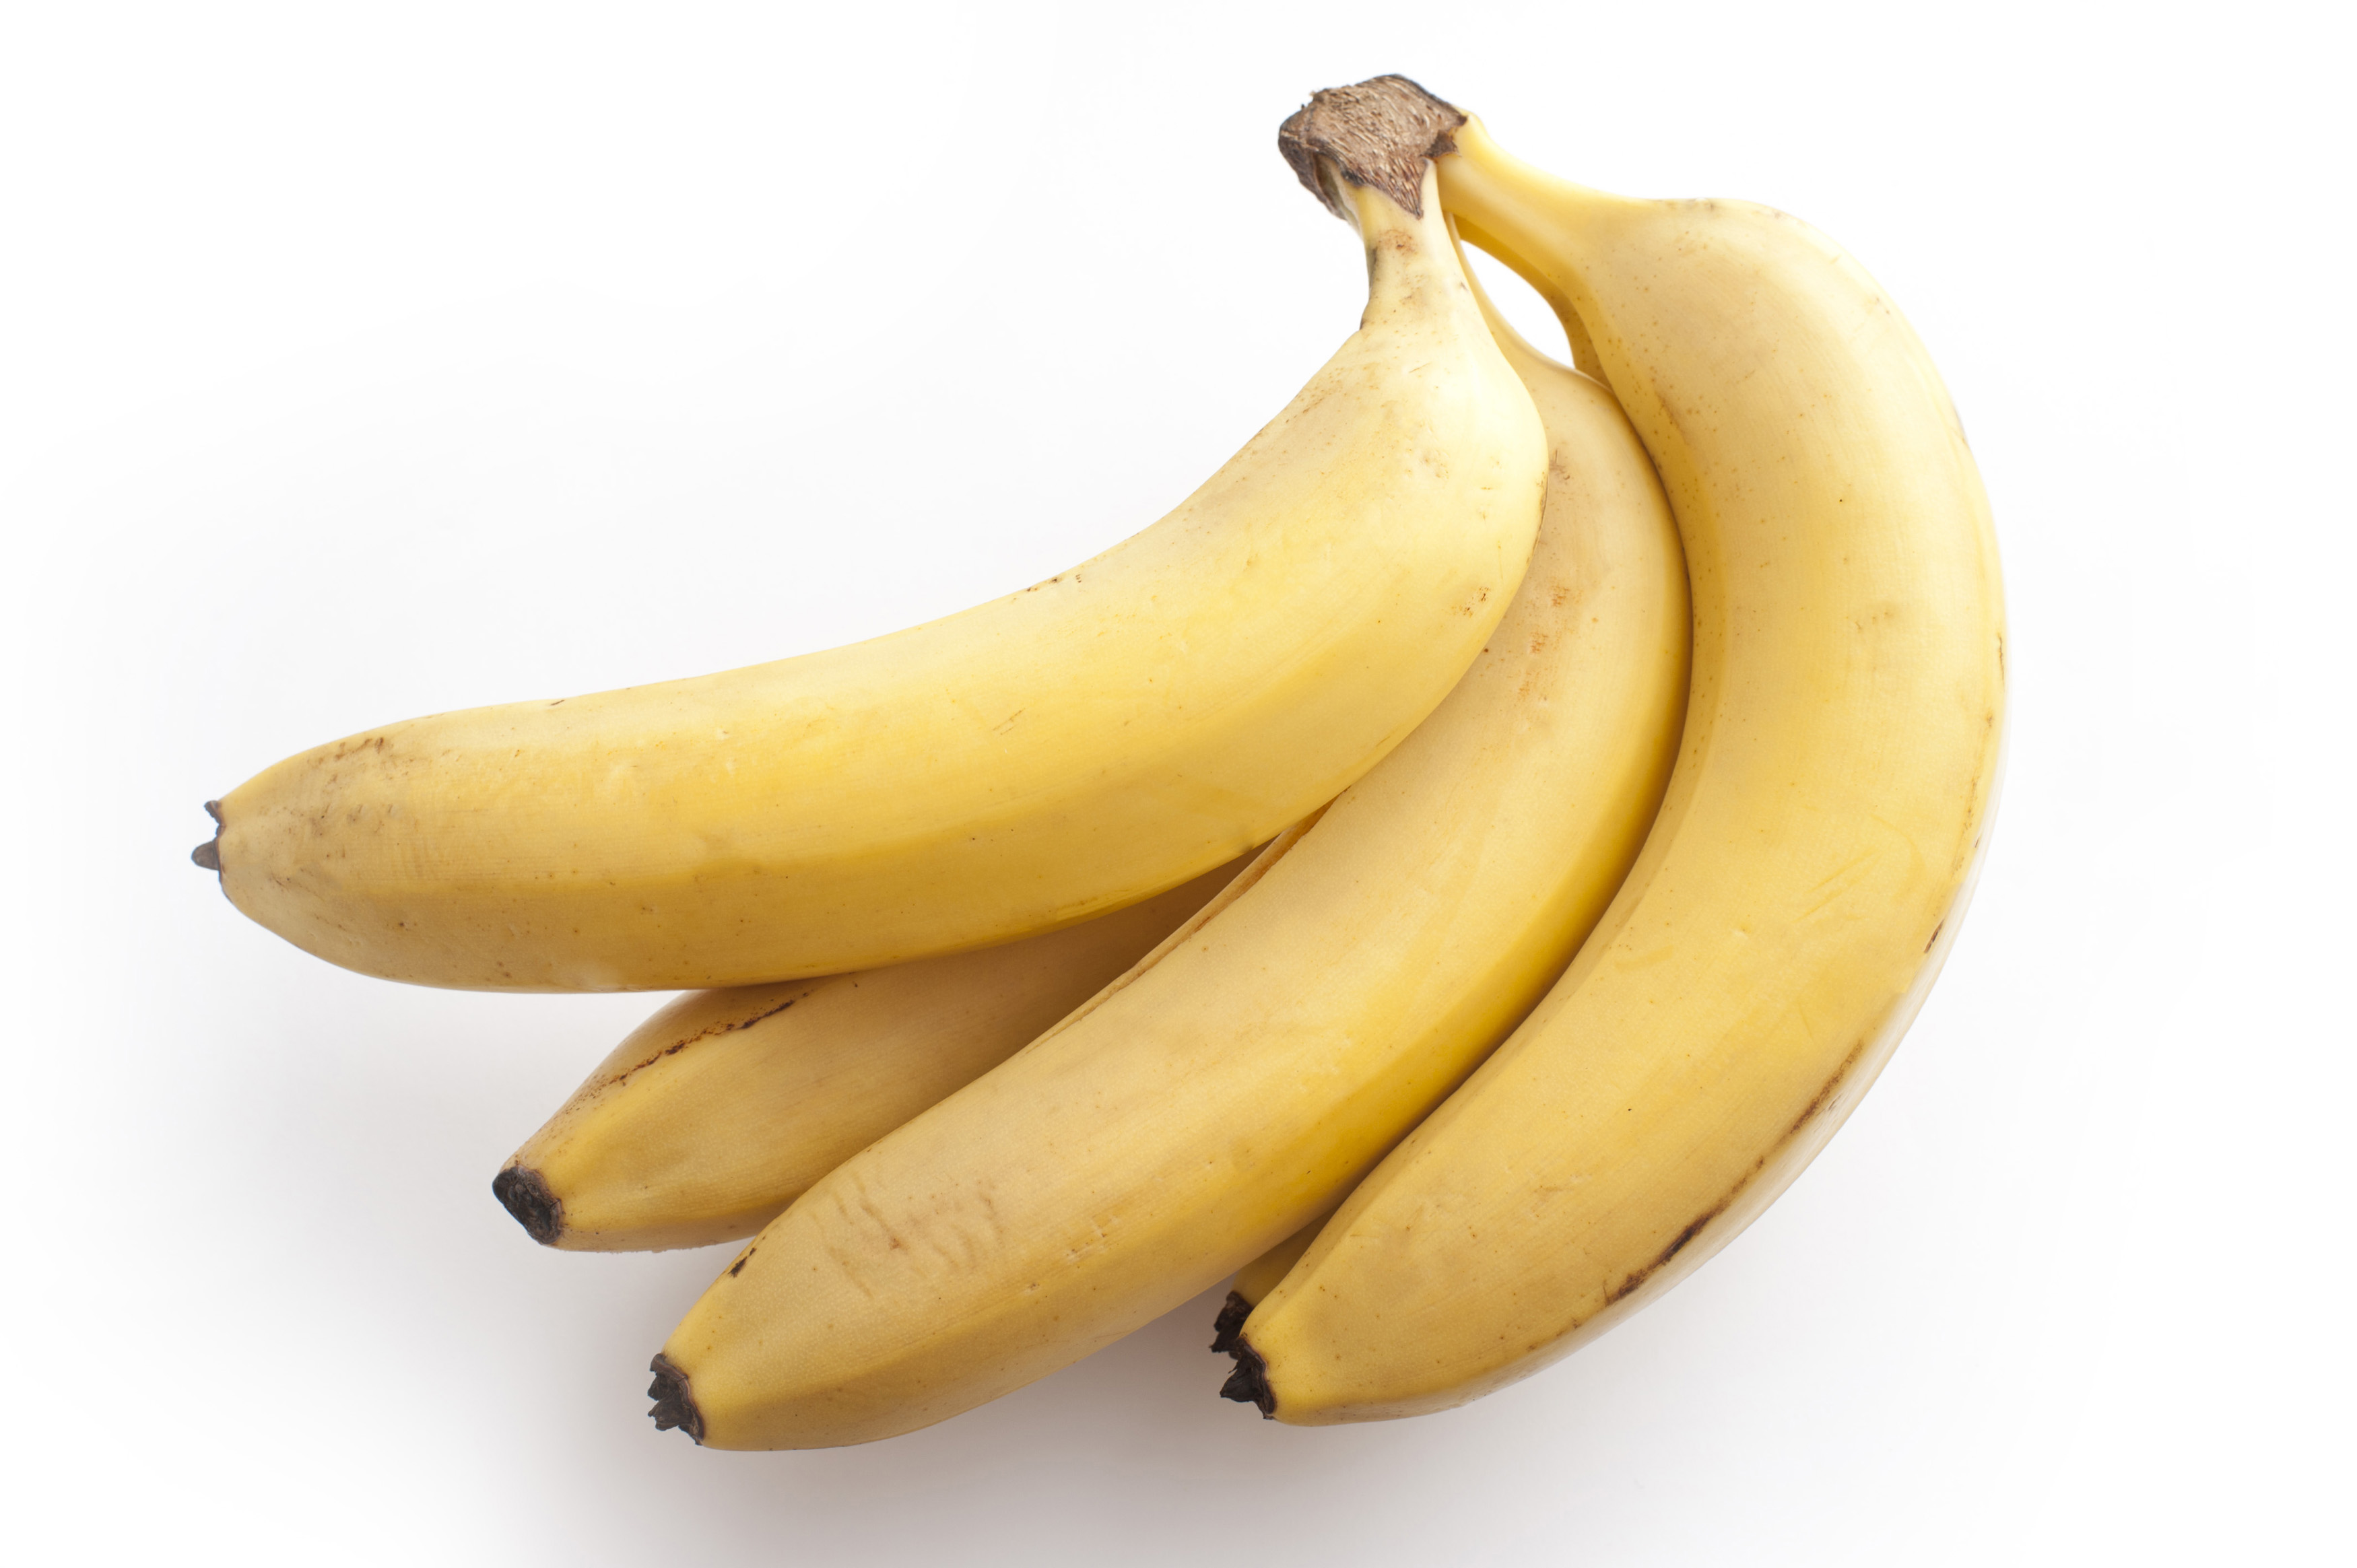 Bunch of bananas on white background - Free Stock Image